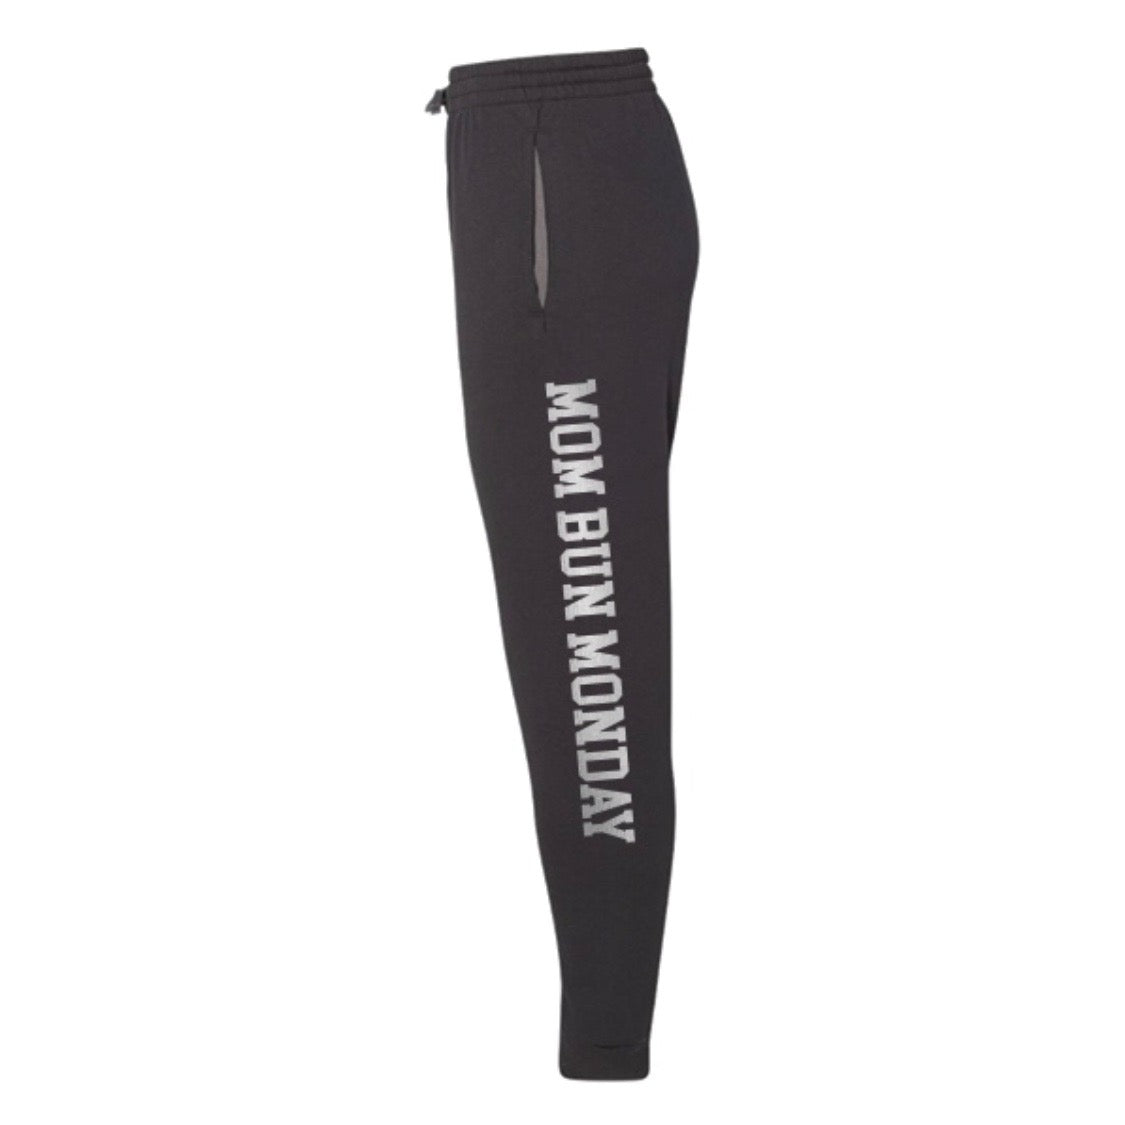 « MOM BUN MONDAY JOGGERS » BLACK WITH SILVER SHIMMER